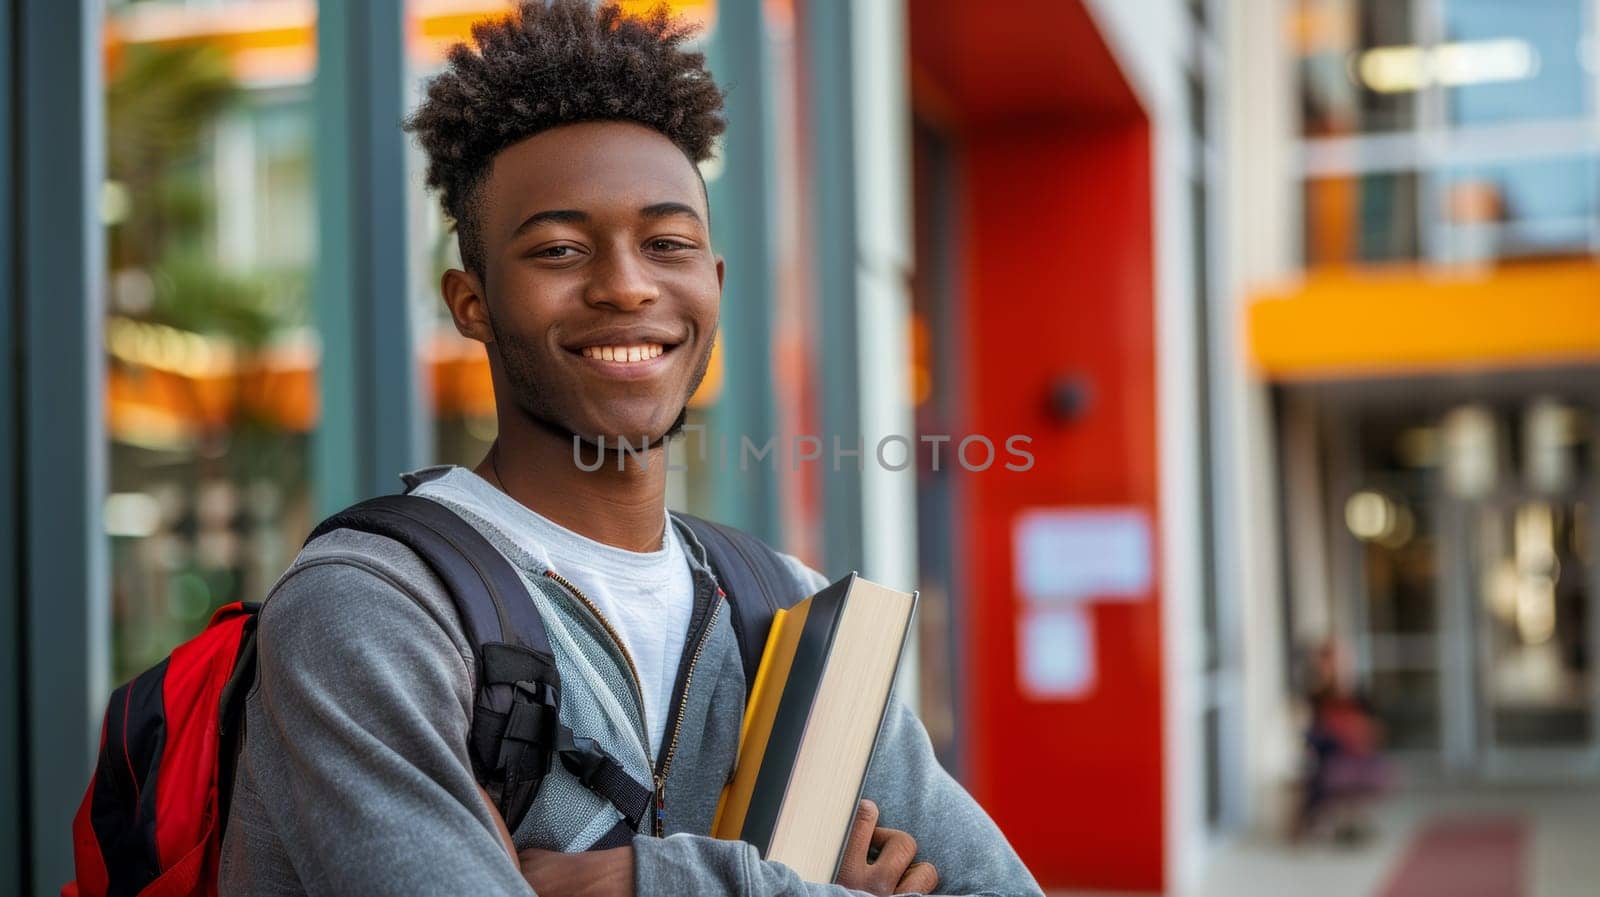 A young man with backpack and books smiling for the camera